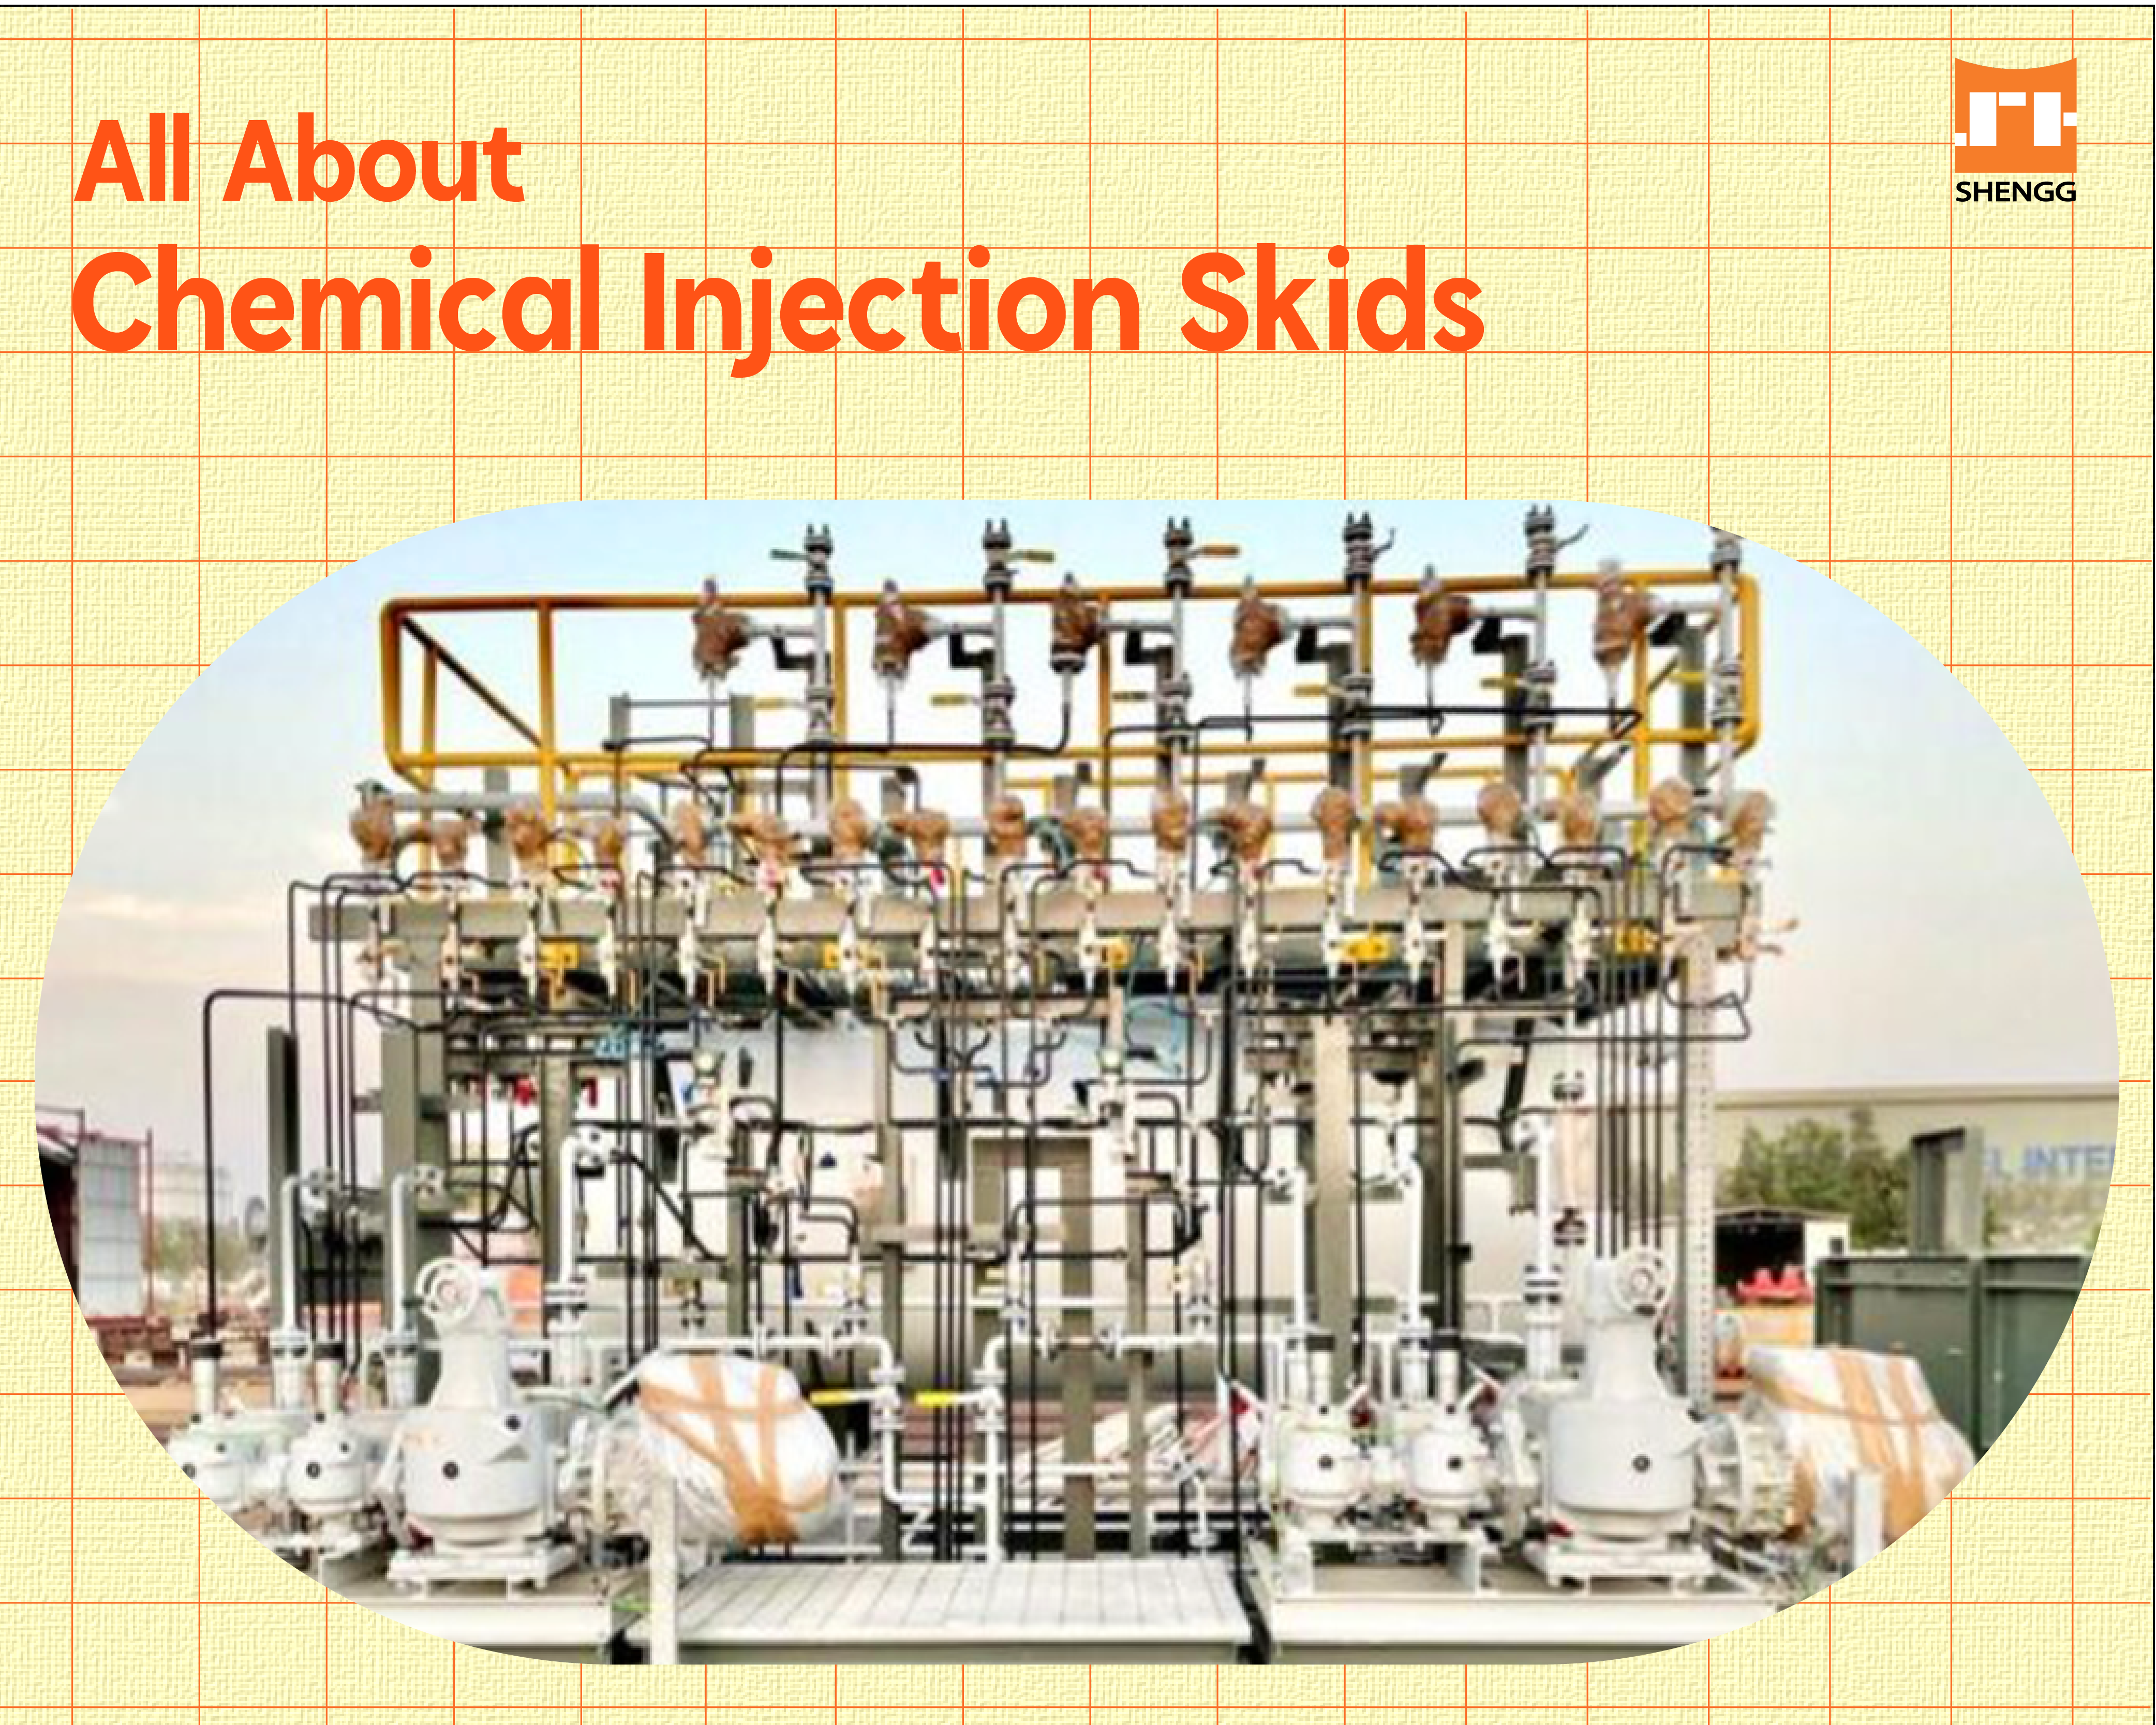 All About: Chemical Injection Skids